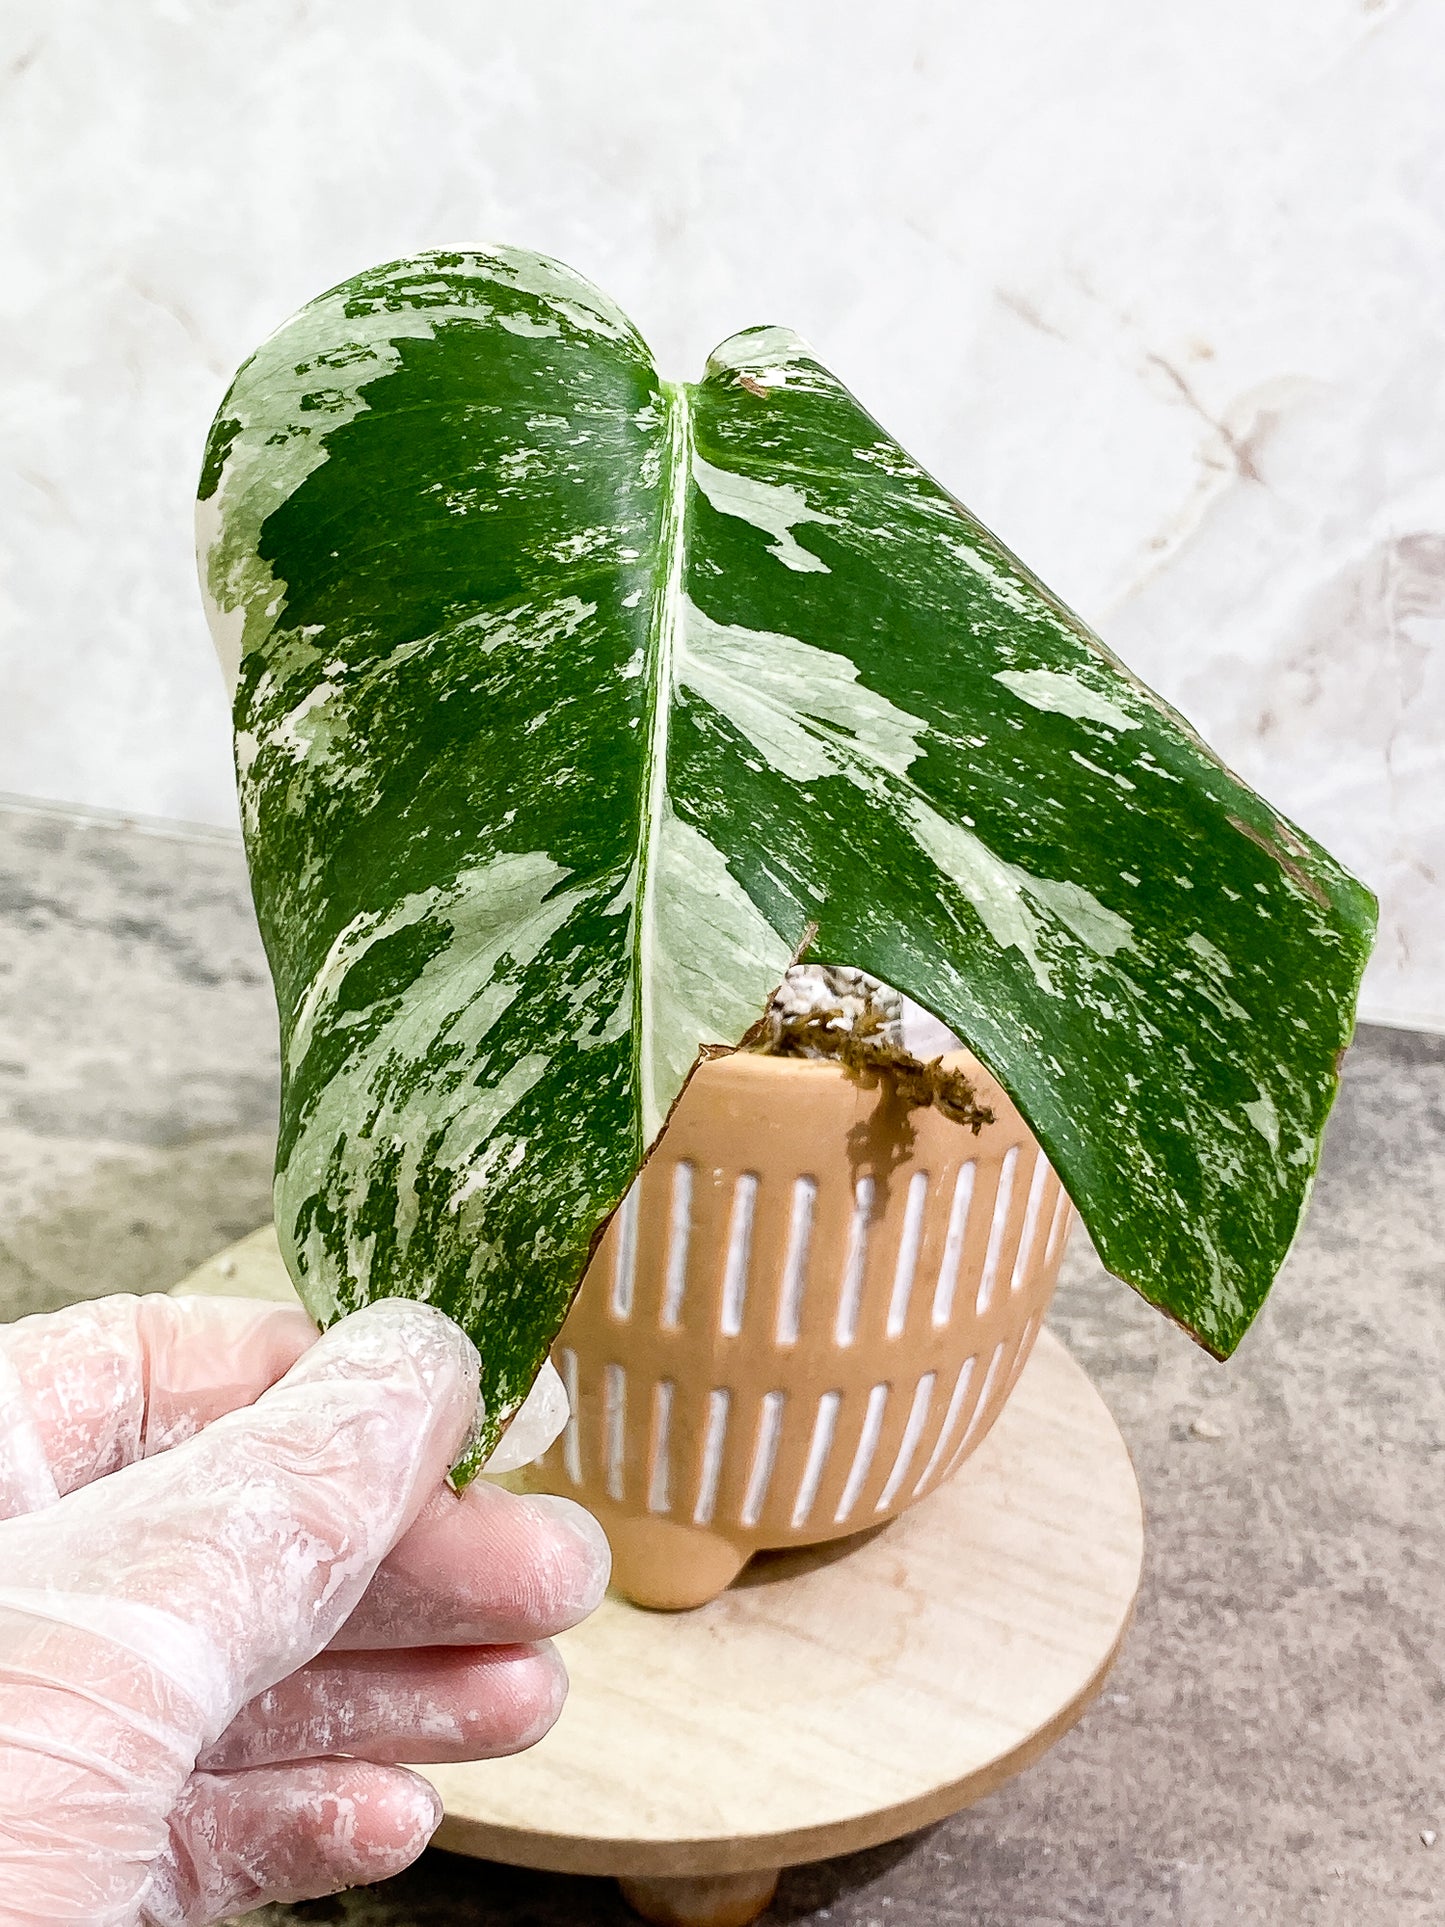 Monstera Albo Variegated 1 leaf 1 growth point fully rooted